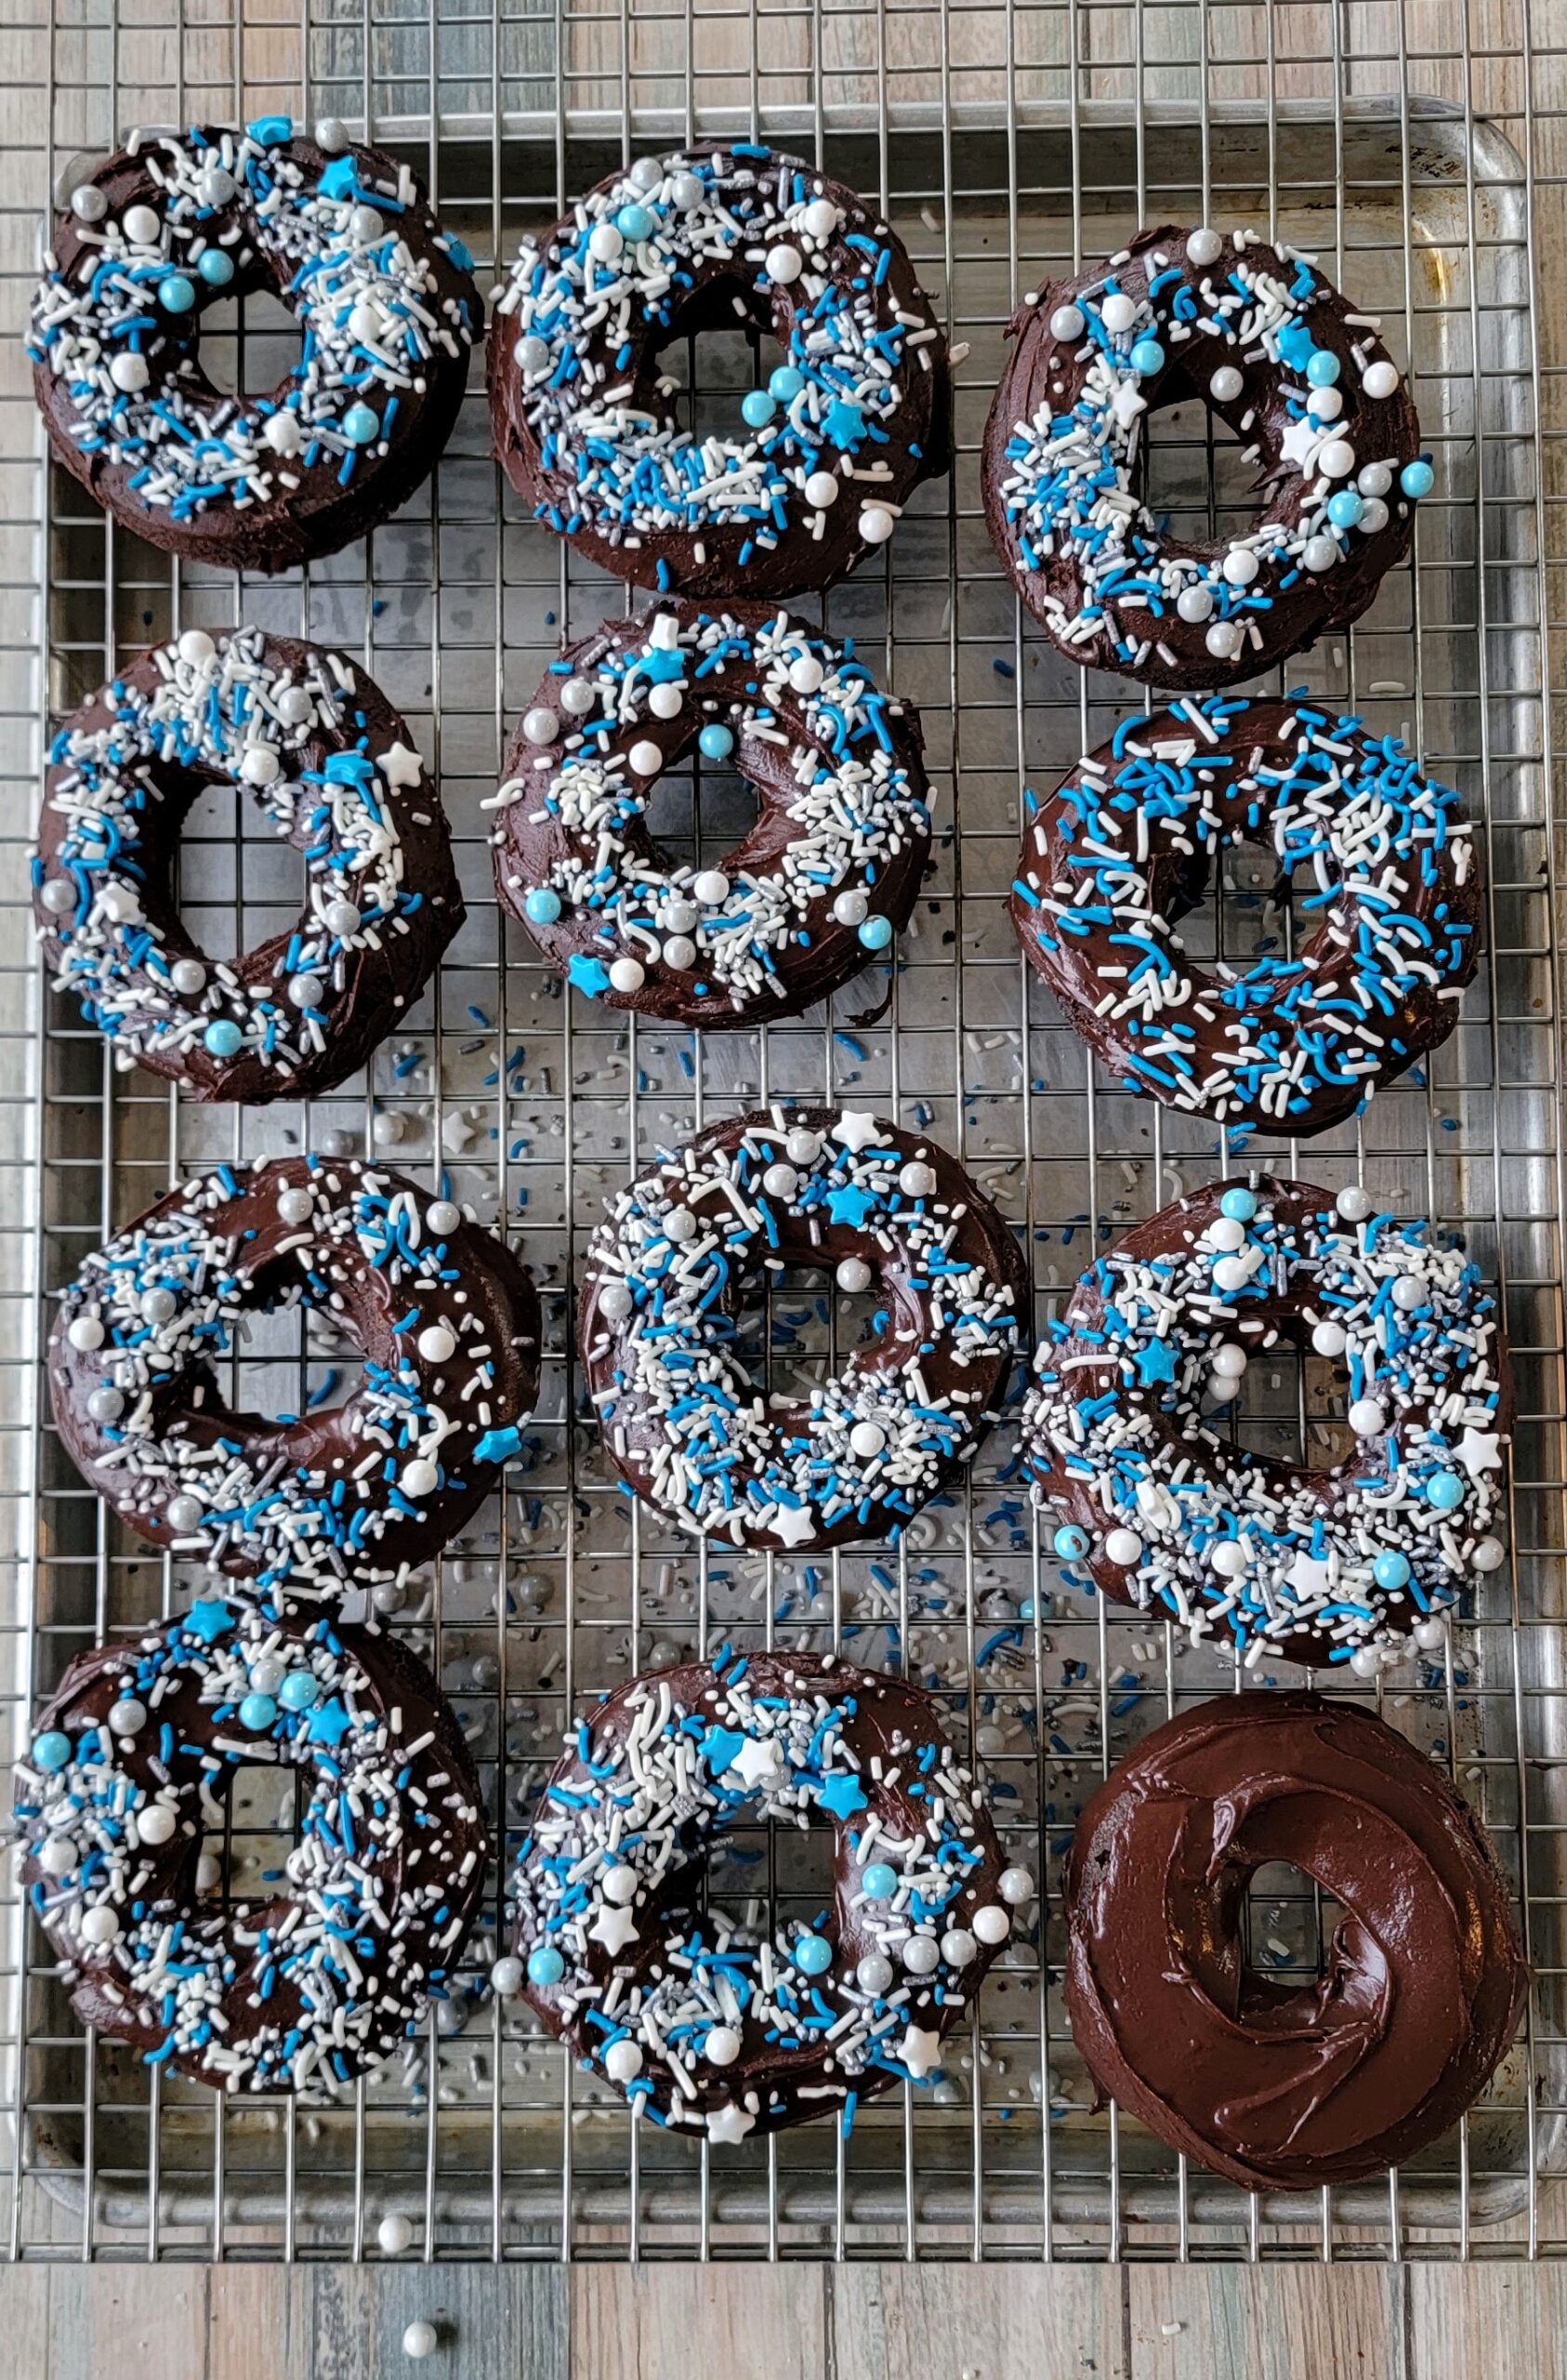 Decorating Double Chocolate Gluten Free Donuts